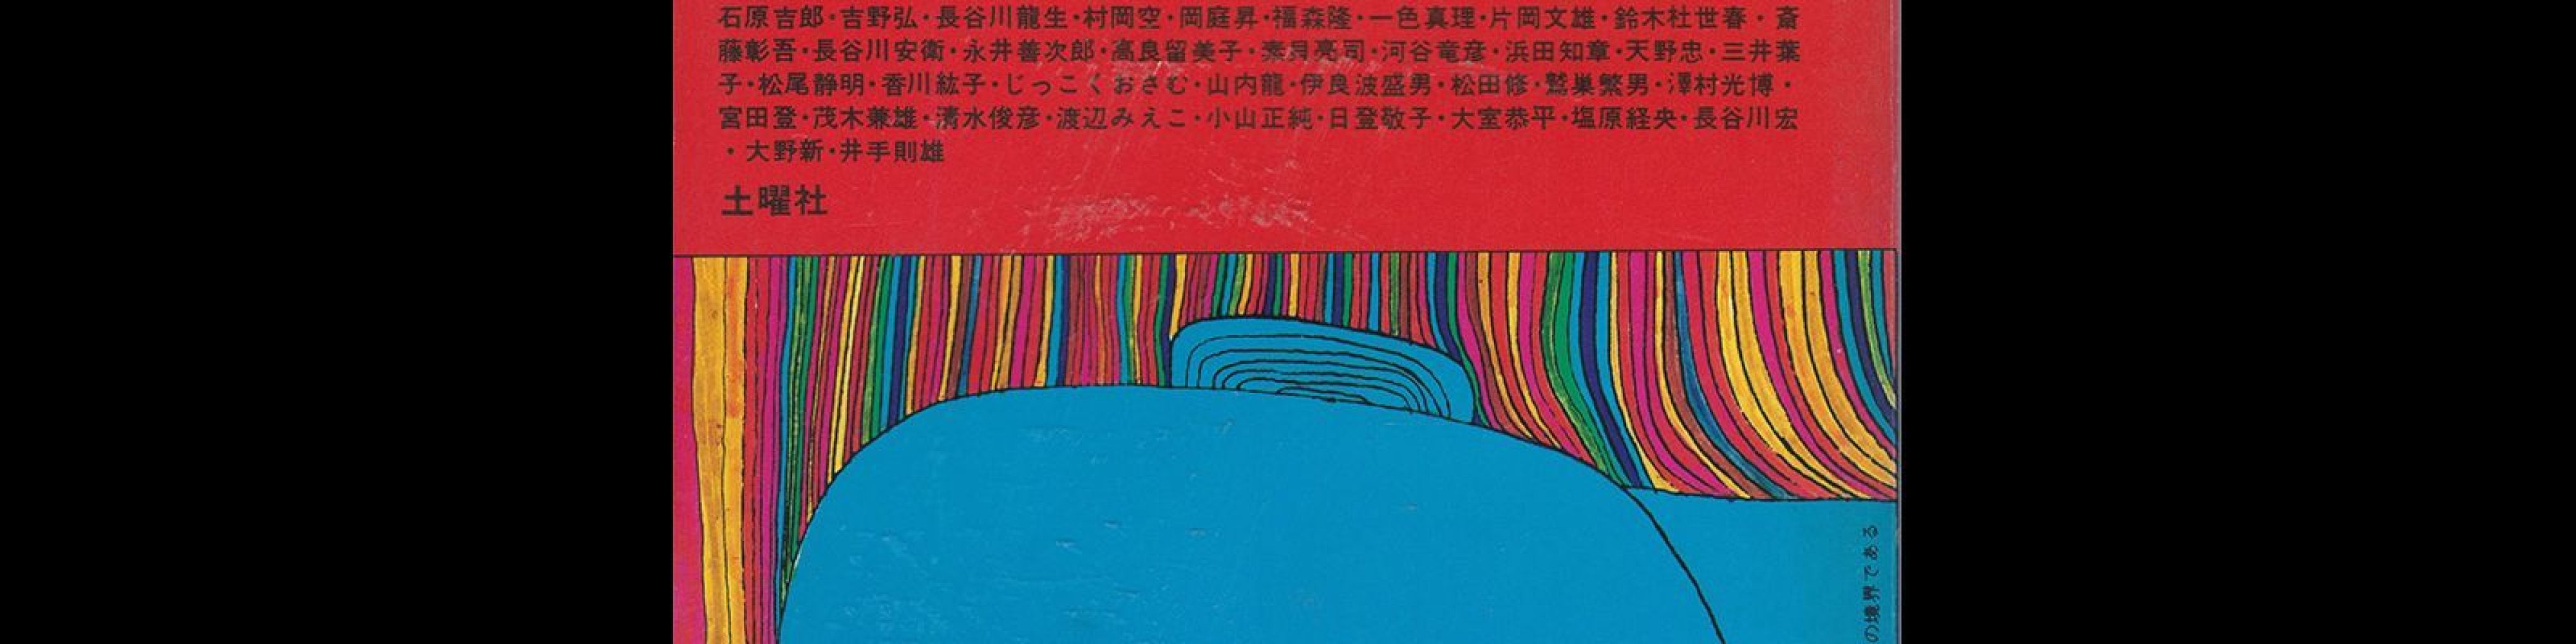 Poetry and Thought -Volume 1, Issue 1, 1972. Cover design by Kiyoshi Awazu